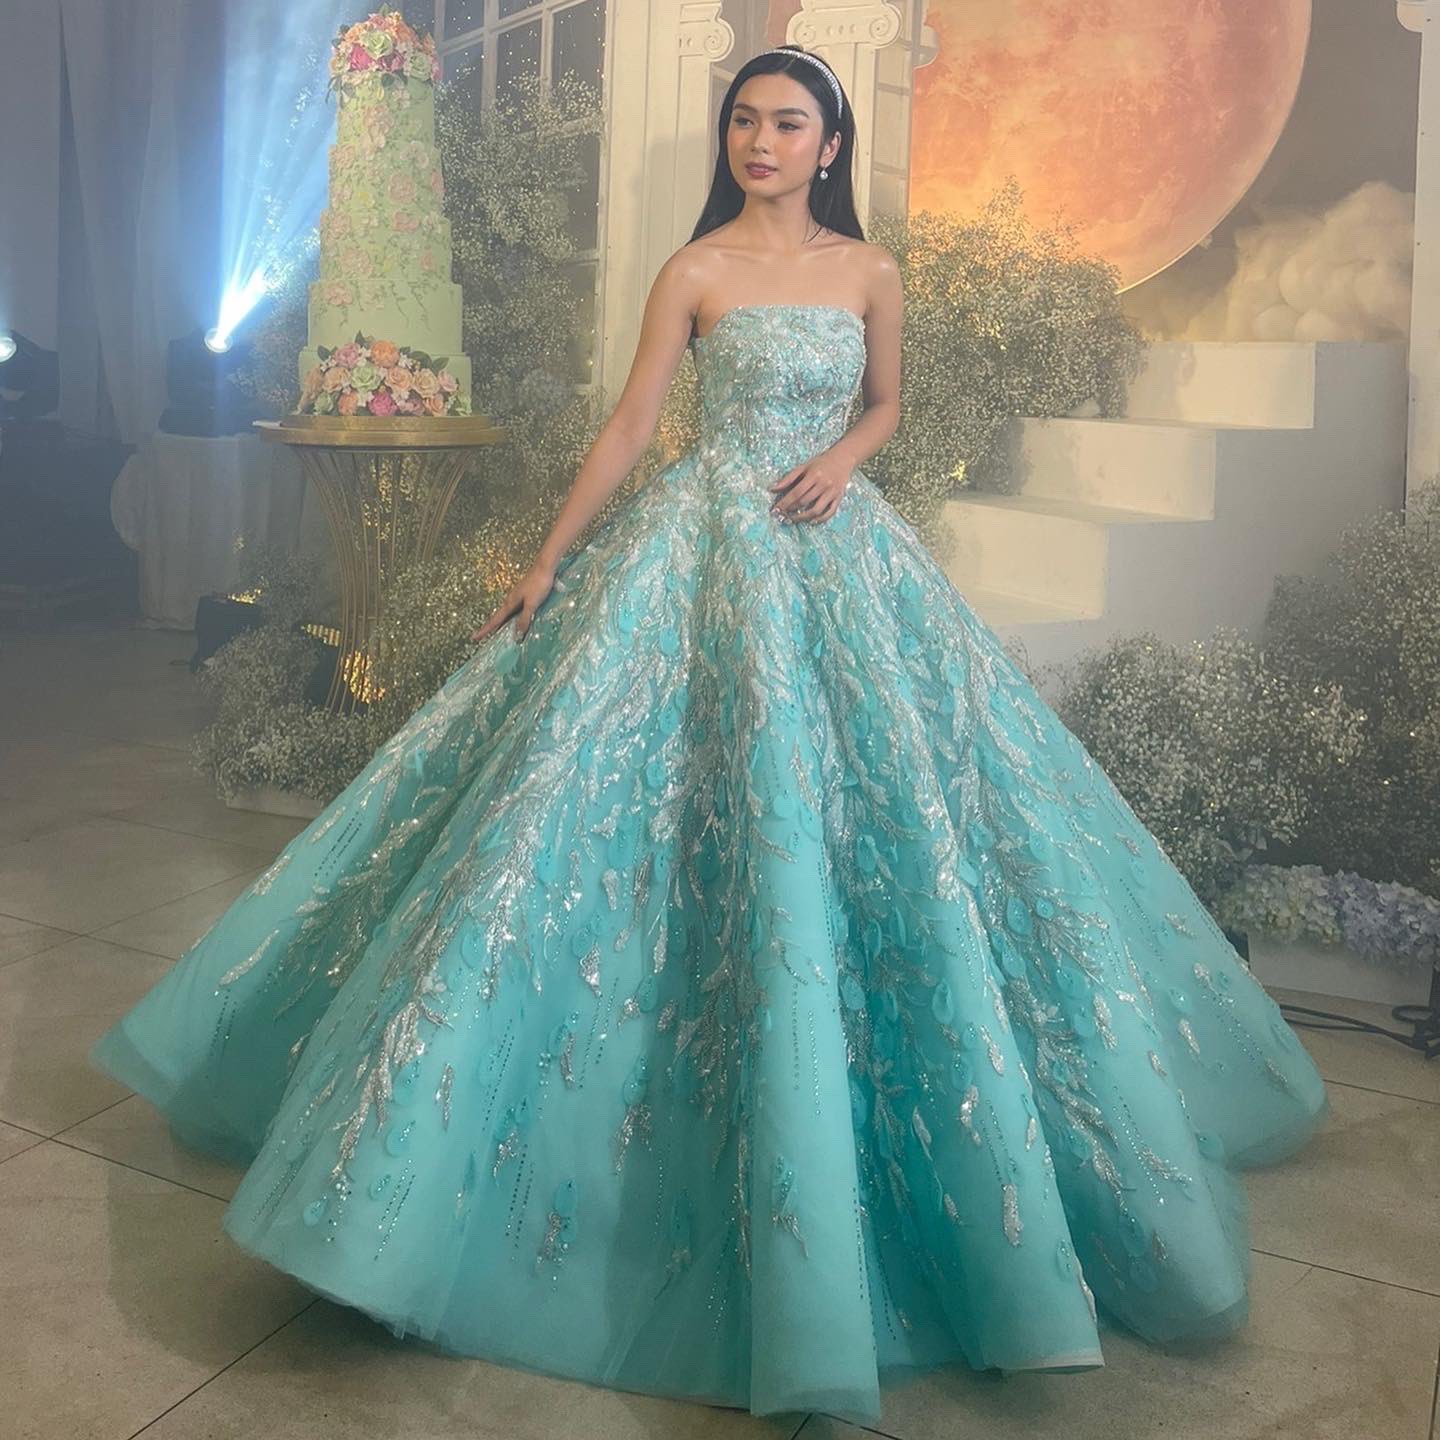 40+ Ball Gown Dresses to Wear at Your Quinceanera | Ball gowns, Prom dresses  ball gown, Princess ball gowns